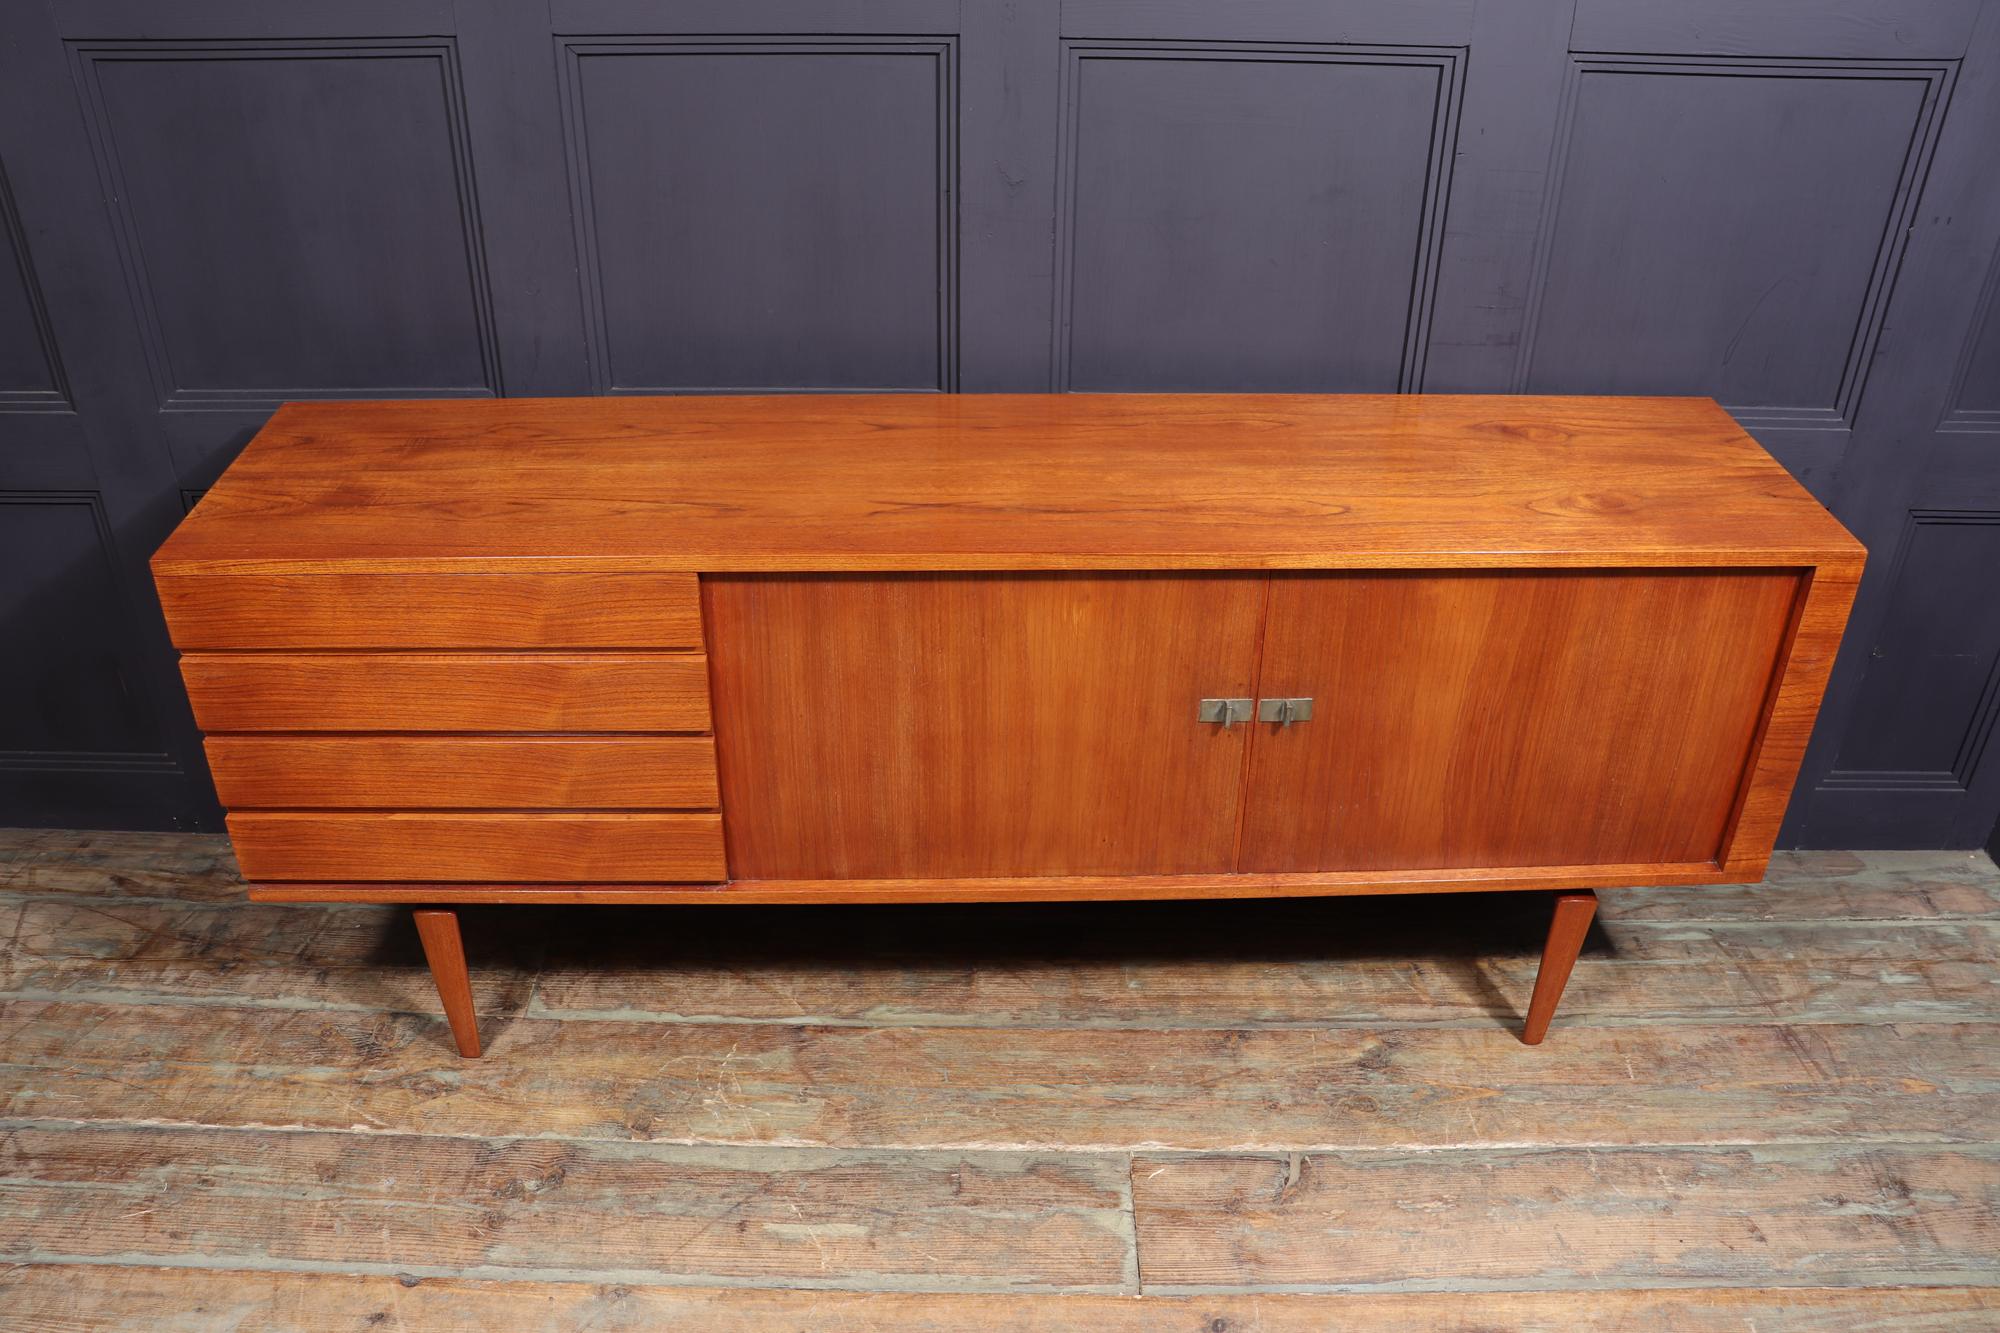 H.W KLEIN DESIGN SIDEBOARD PRODUCED BY BRAMIN.
Designed in the 1960’s by Henry Walter Klein and produced by Bramin, this early example in teak has two sliding tambour doors with shelves behind and four drawers to the left with integrated handle